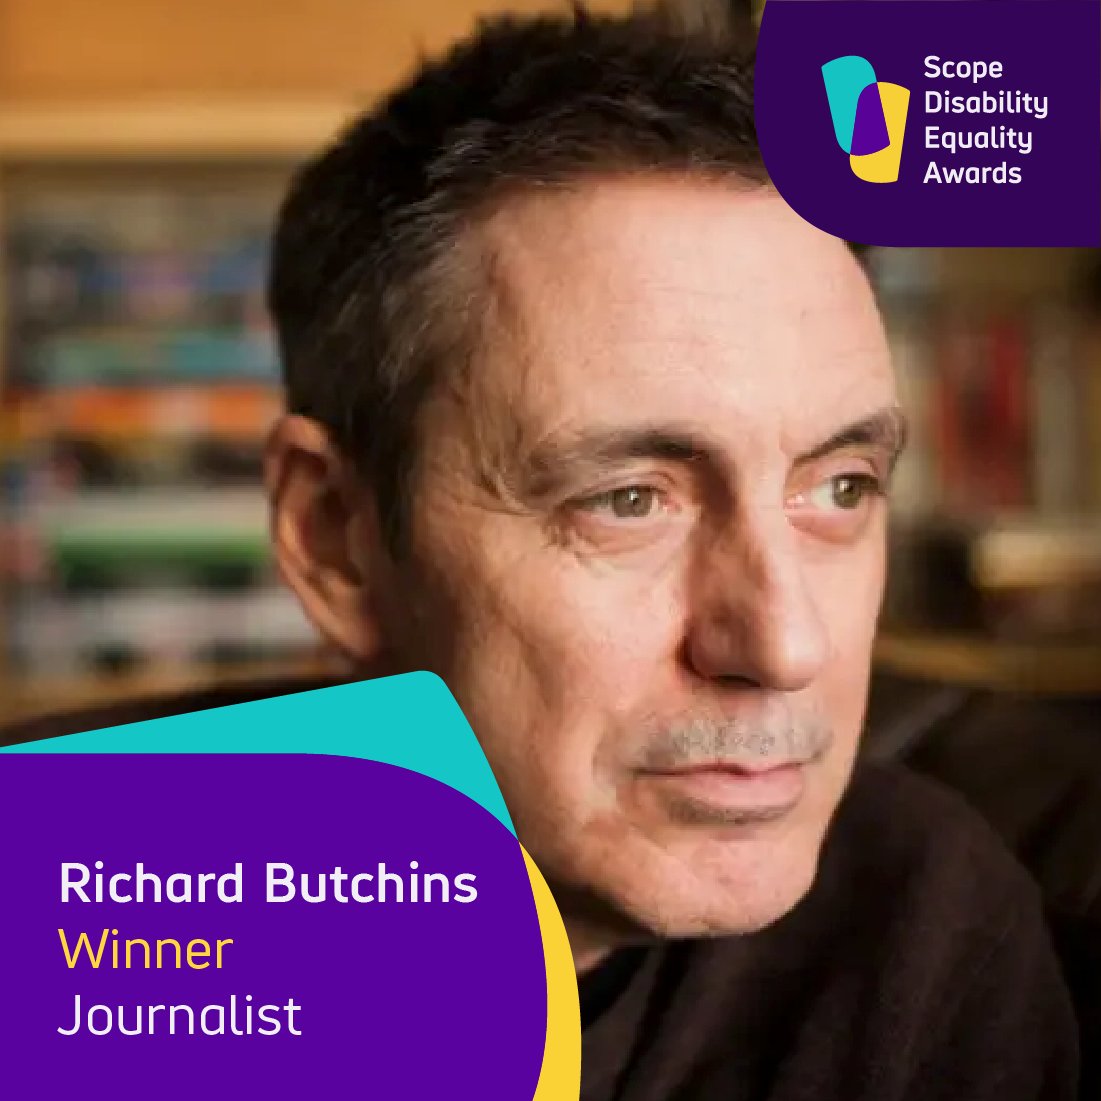 🏆 Our Journalist award goes to @richardbutchins! 📺 Richard’s documentaries shed light on disability hate crime, benefits, and discrimination. He presents these issues to a mainstream audience, sparking meaningful discussions.